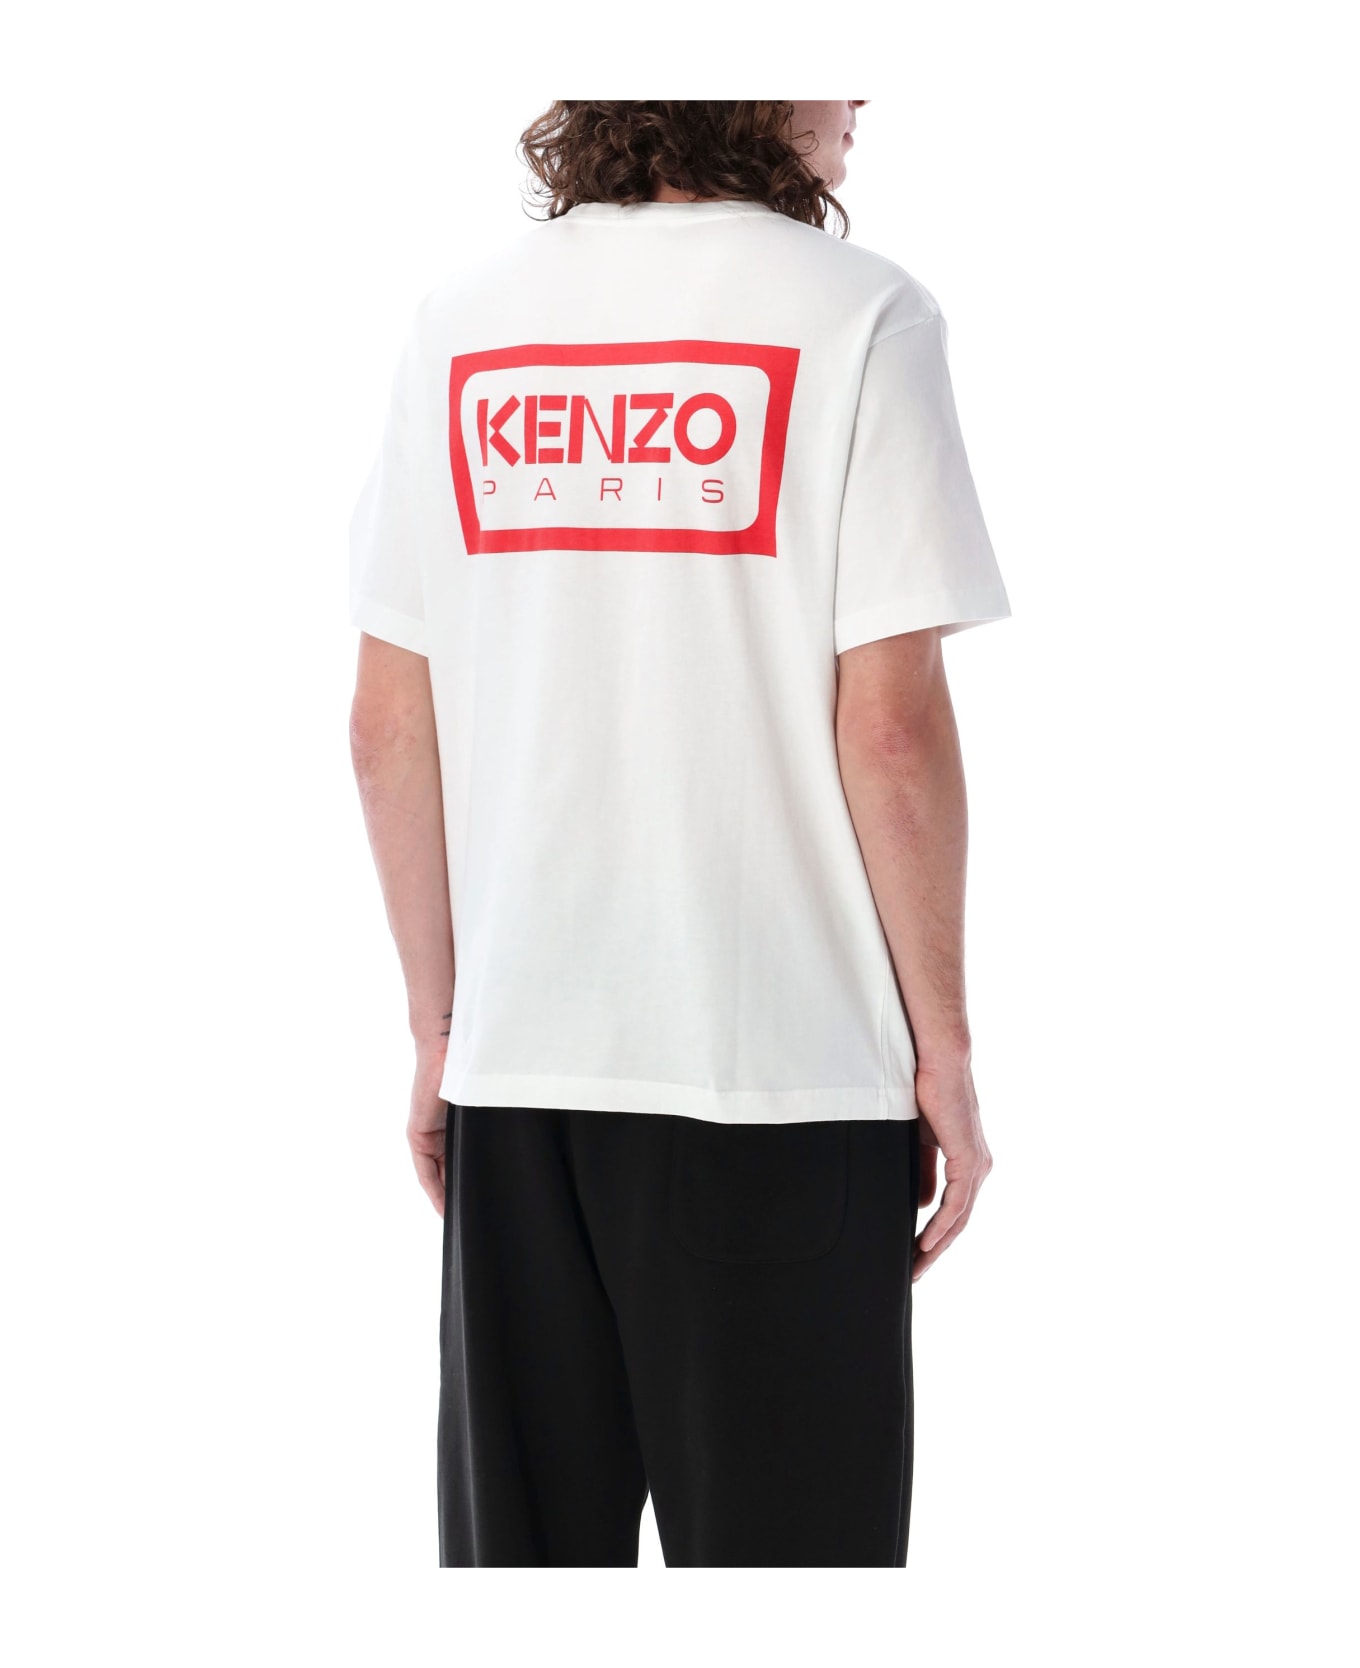 Kenzo Bicolor Kp Classic T-shirt - OFF WHITE